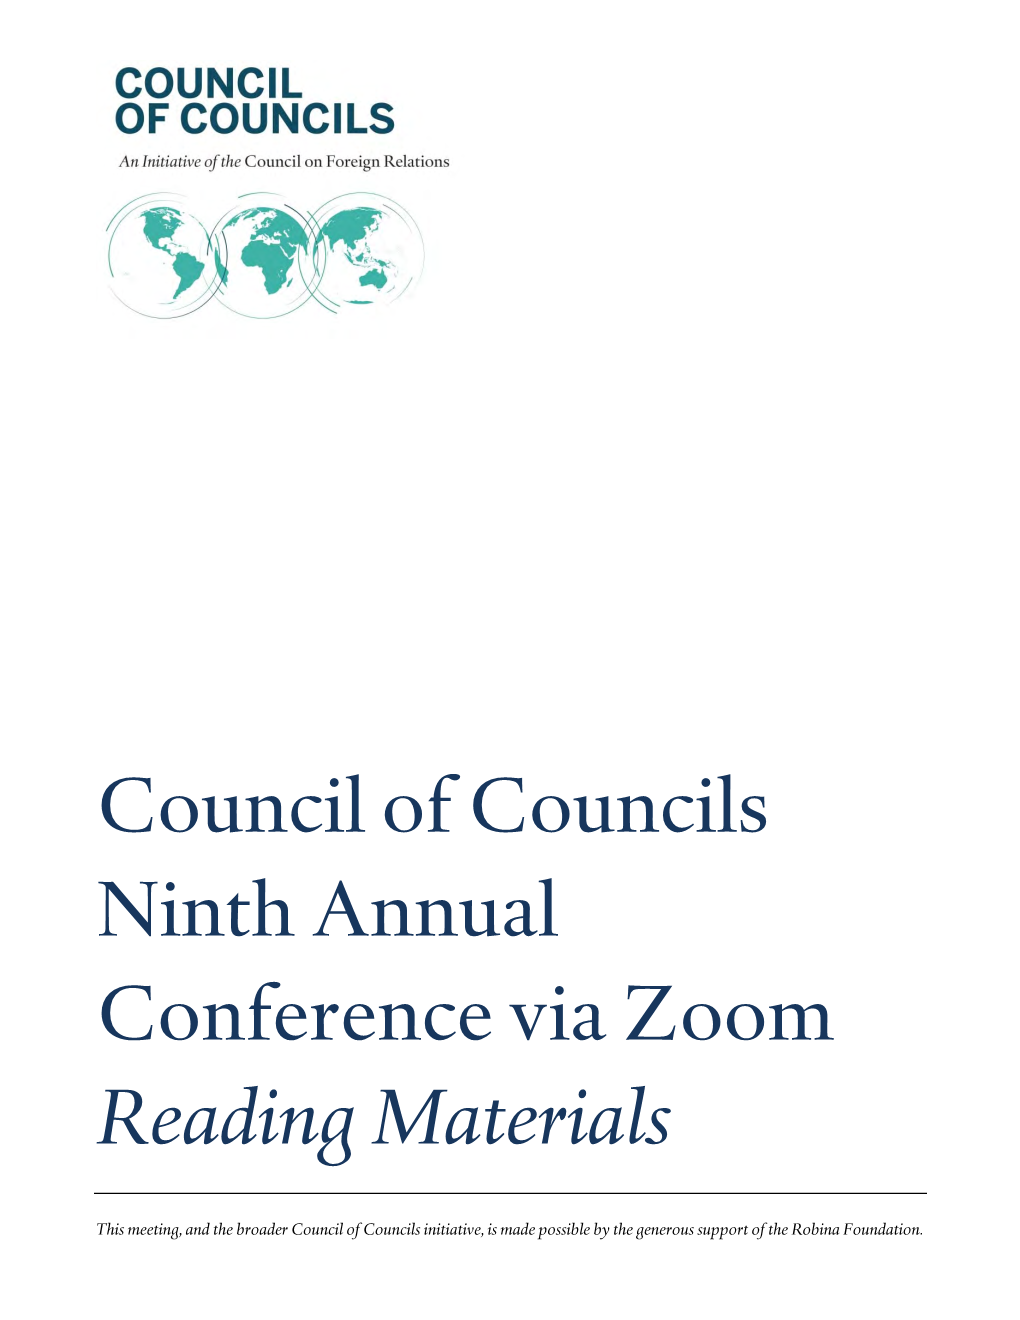 Council of Councils Ninth Annual Conference Via Zoom Reading Materials